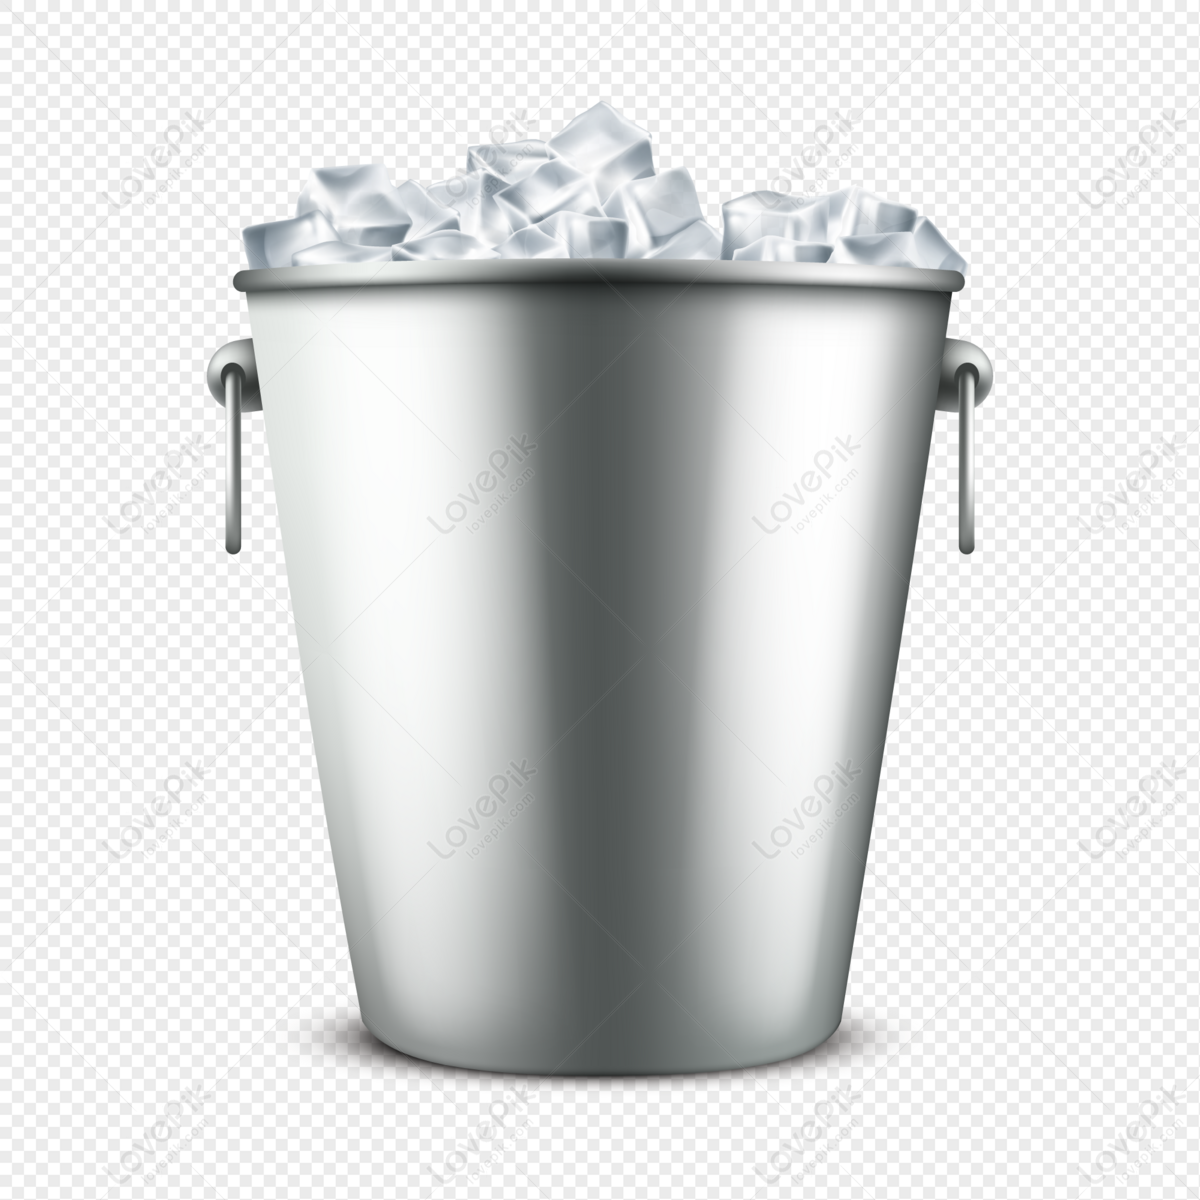 Ice Bucket, Ice Cube, Icy, Fish Bucket PNG Transparent Background